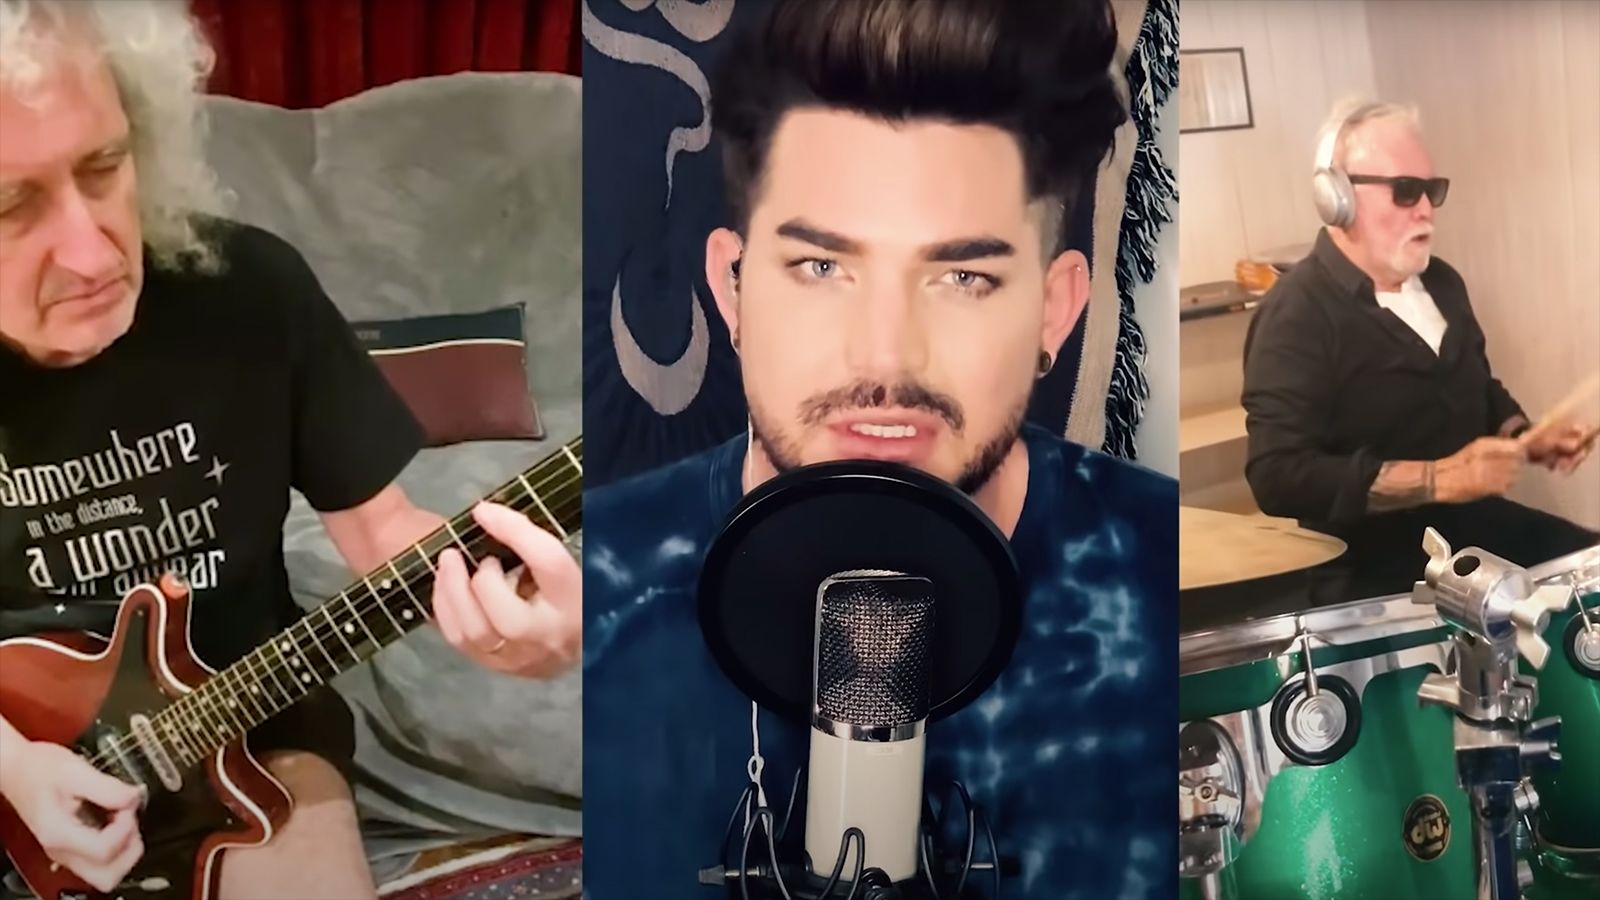 Kort levetid venlige Kæledyr Queen and Adam Lambert reimagine classic song with 'You Are The Champions,'  dedicated to health care workers | CNN